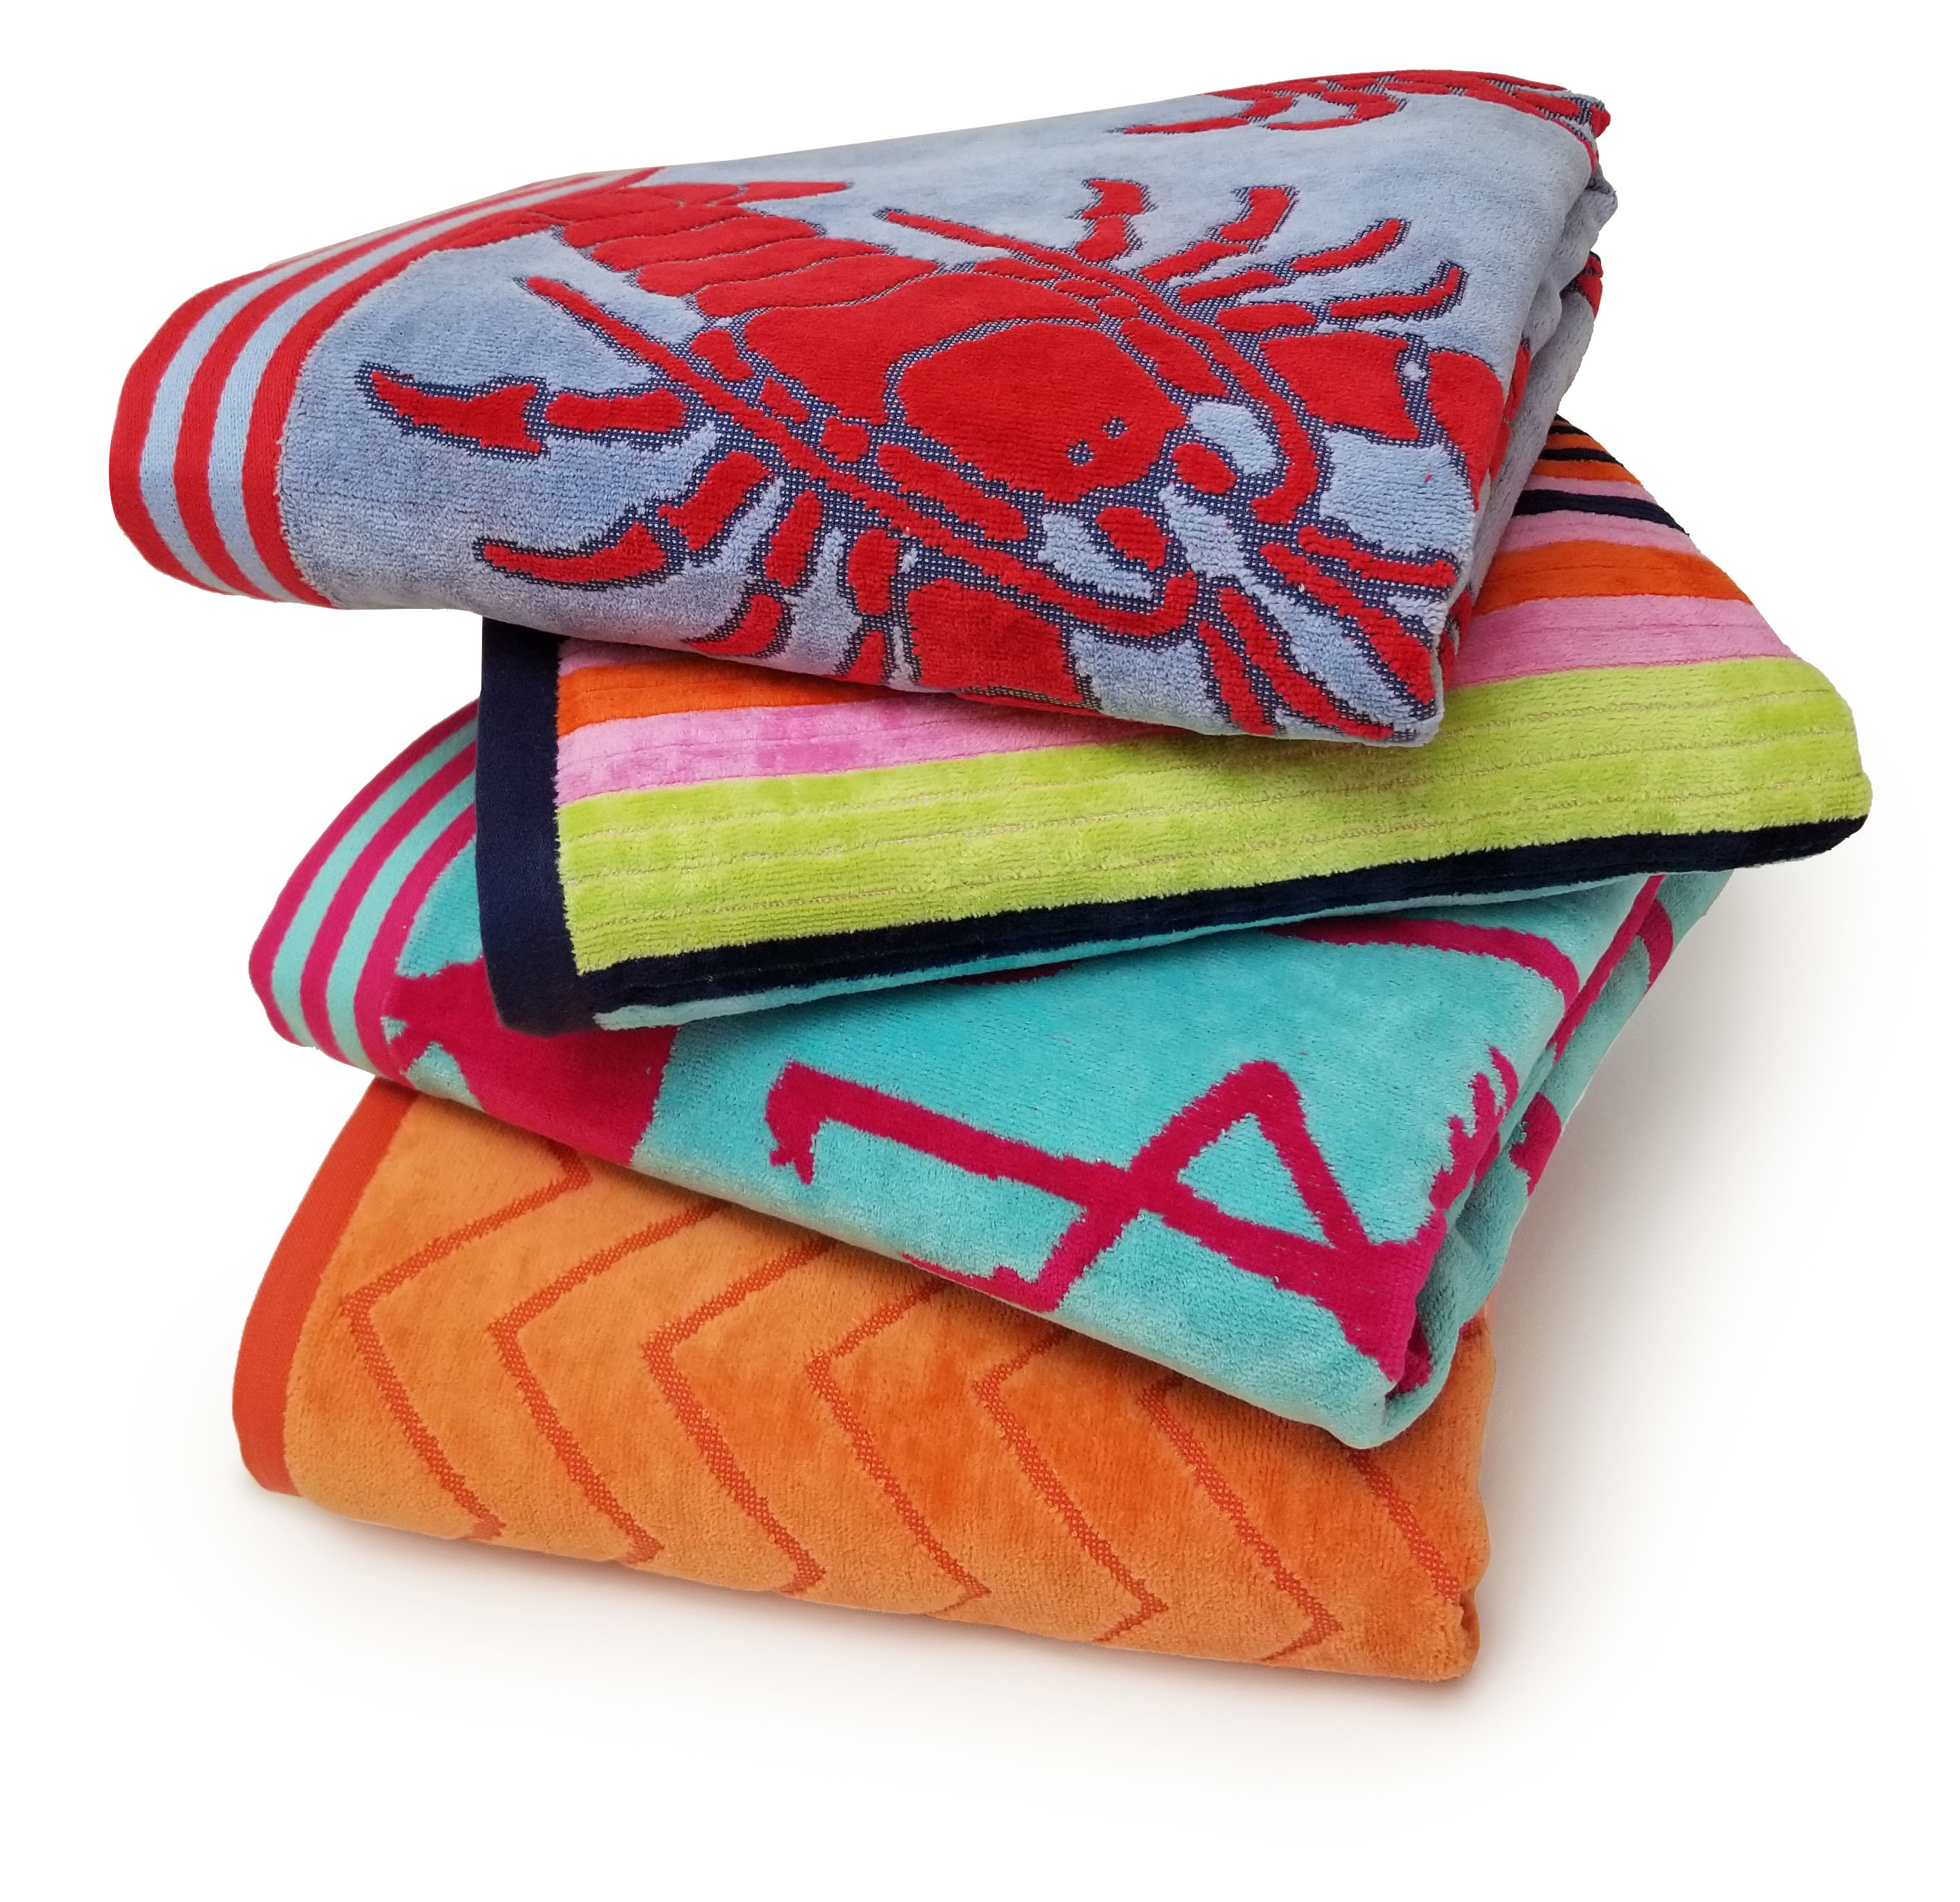 Over-Sized Designer Jacquard Printed Beach Towels Super Quality and Very Absorbent 100% Cotton Towel in Beautiful Colors By Maya Island 